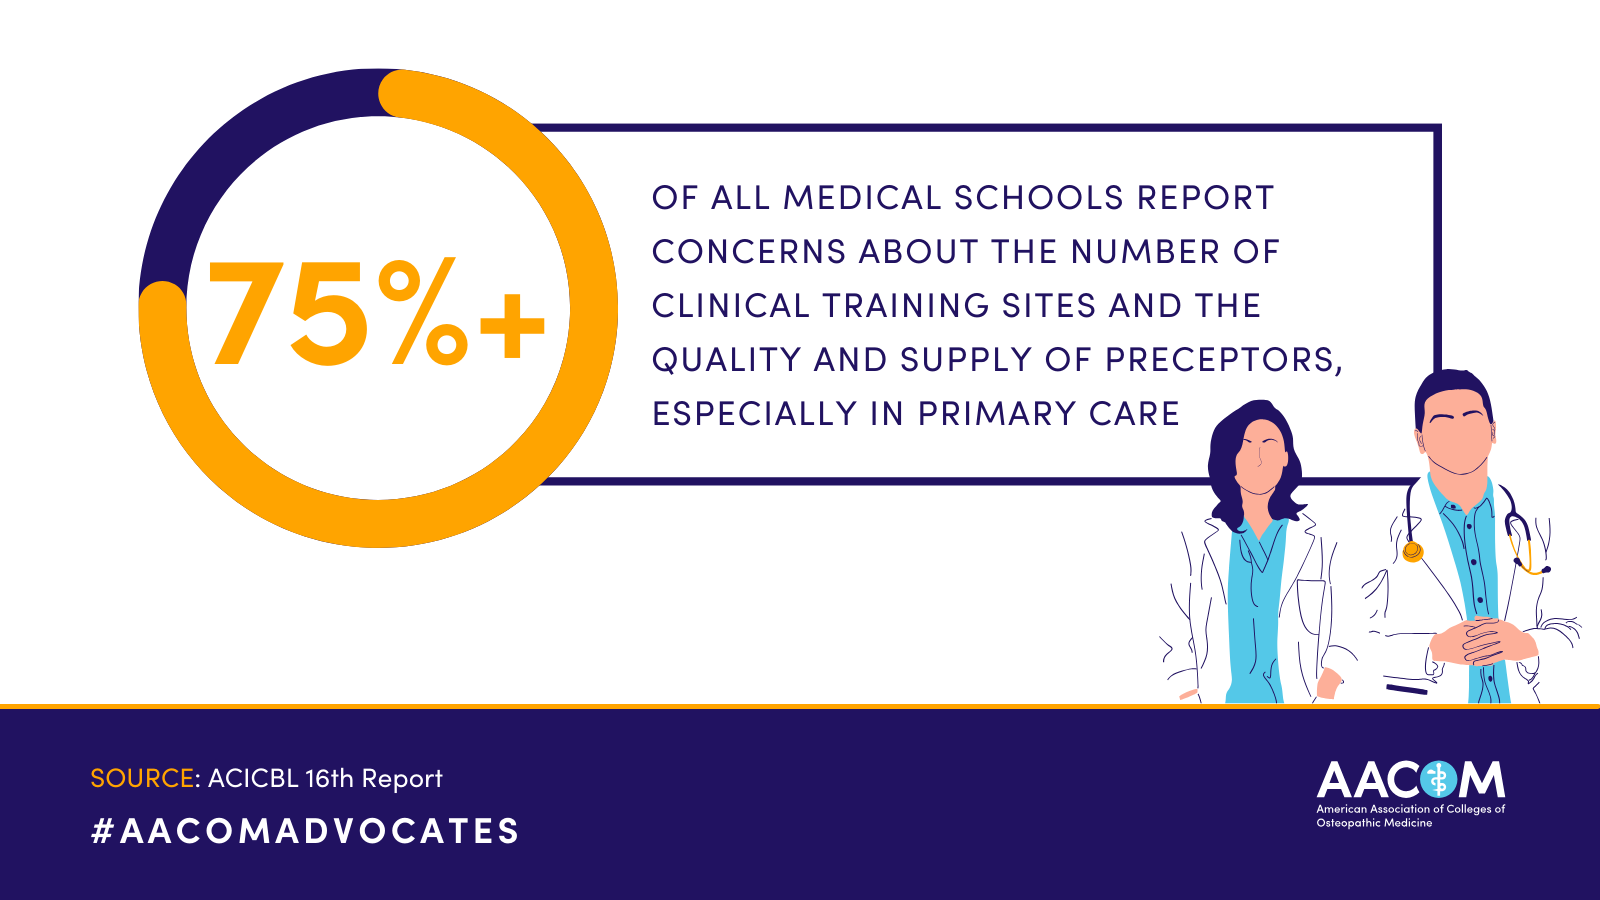 75%+ of all medical schools report concerns about the number of clinical training sites and the quality and supply of preceptors, especially in primary care